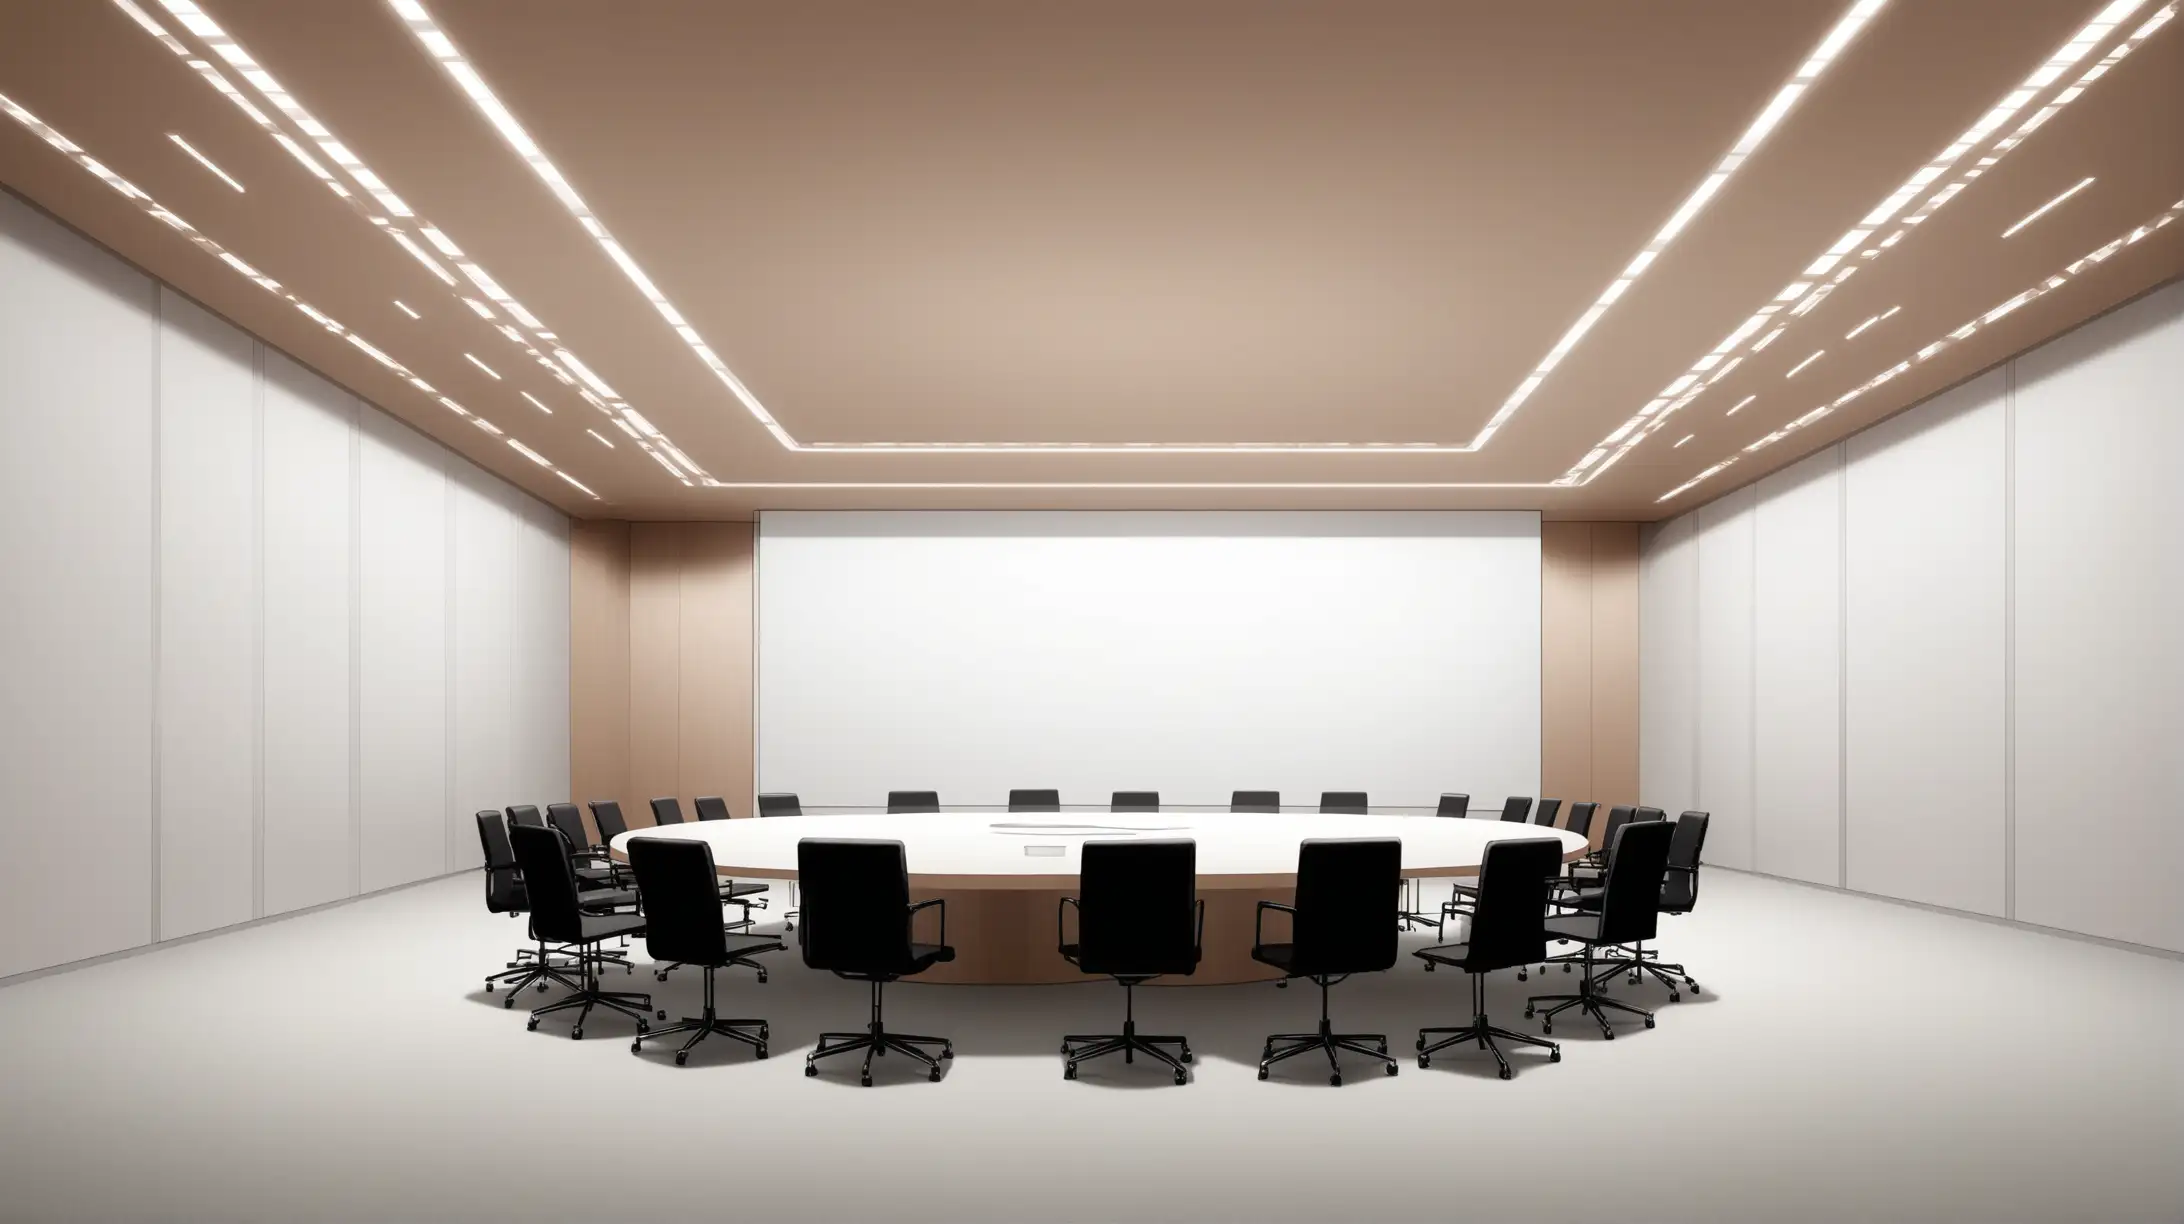 Generate an image of a meeting space that has a sleek aesthetic, no people and not detailed 